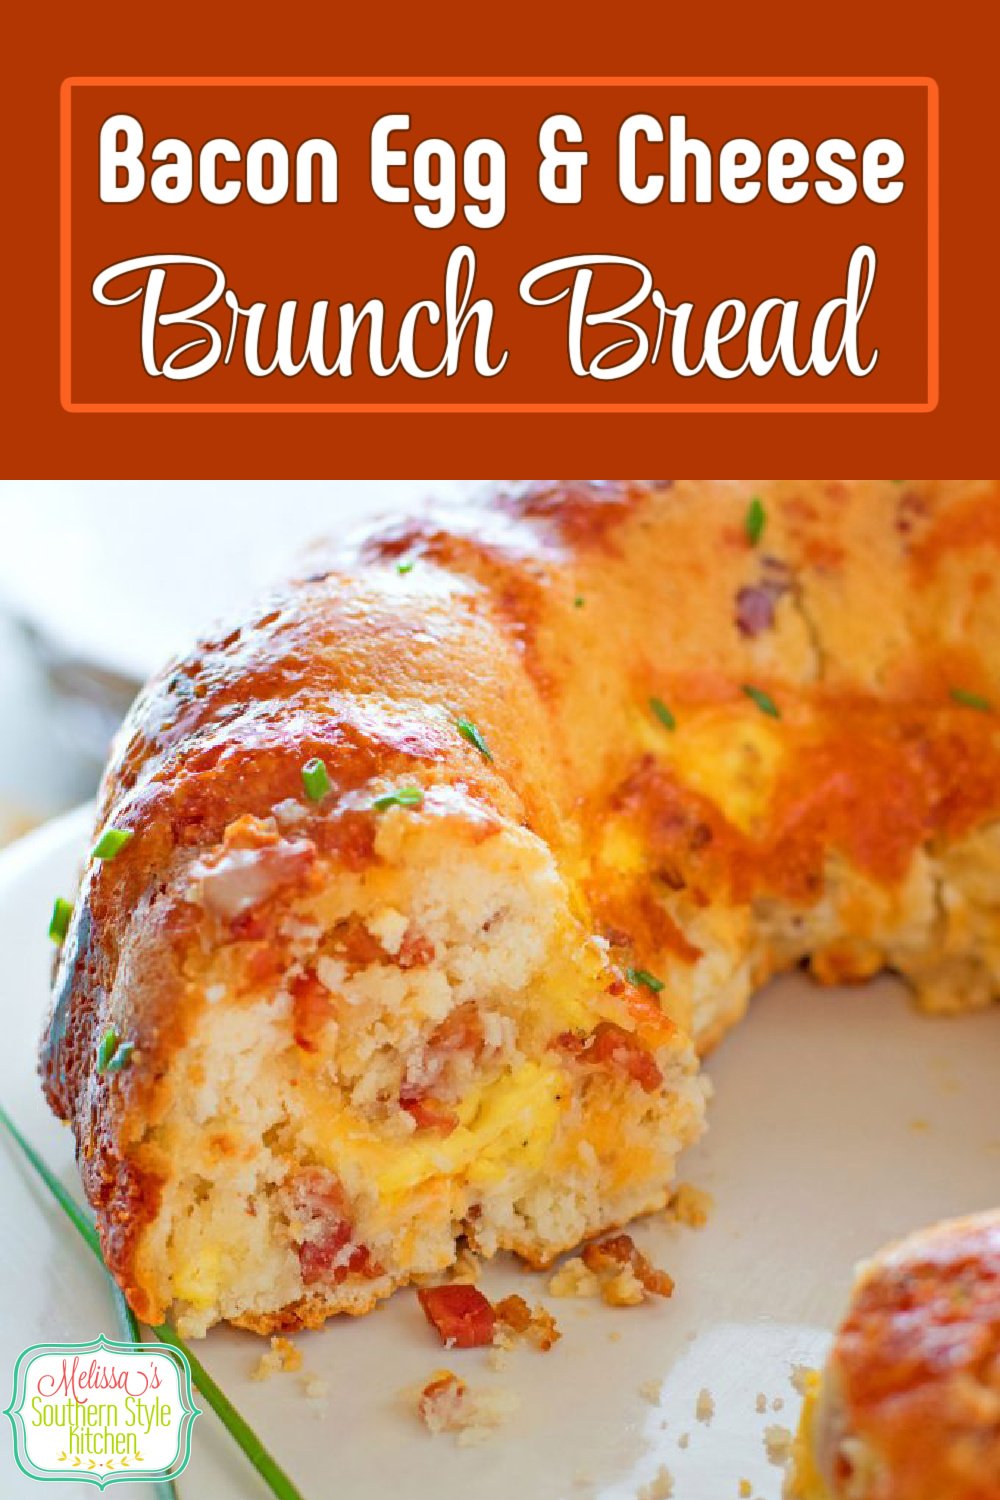 Bundt Pan Bacon Egg and Cheese Brunch Bread is a delicious start to ANY day #brunchbread #baconeggandcheese #cheesebread #bacon #bundtpan #buntpanbread #breadrecipes #biscuits #breakfast #eggs #southernfood #southernrecipes #holidaybrunch #holidayrecipes #buttermilkbiscuits